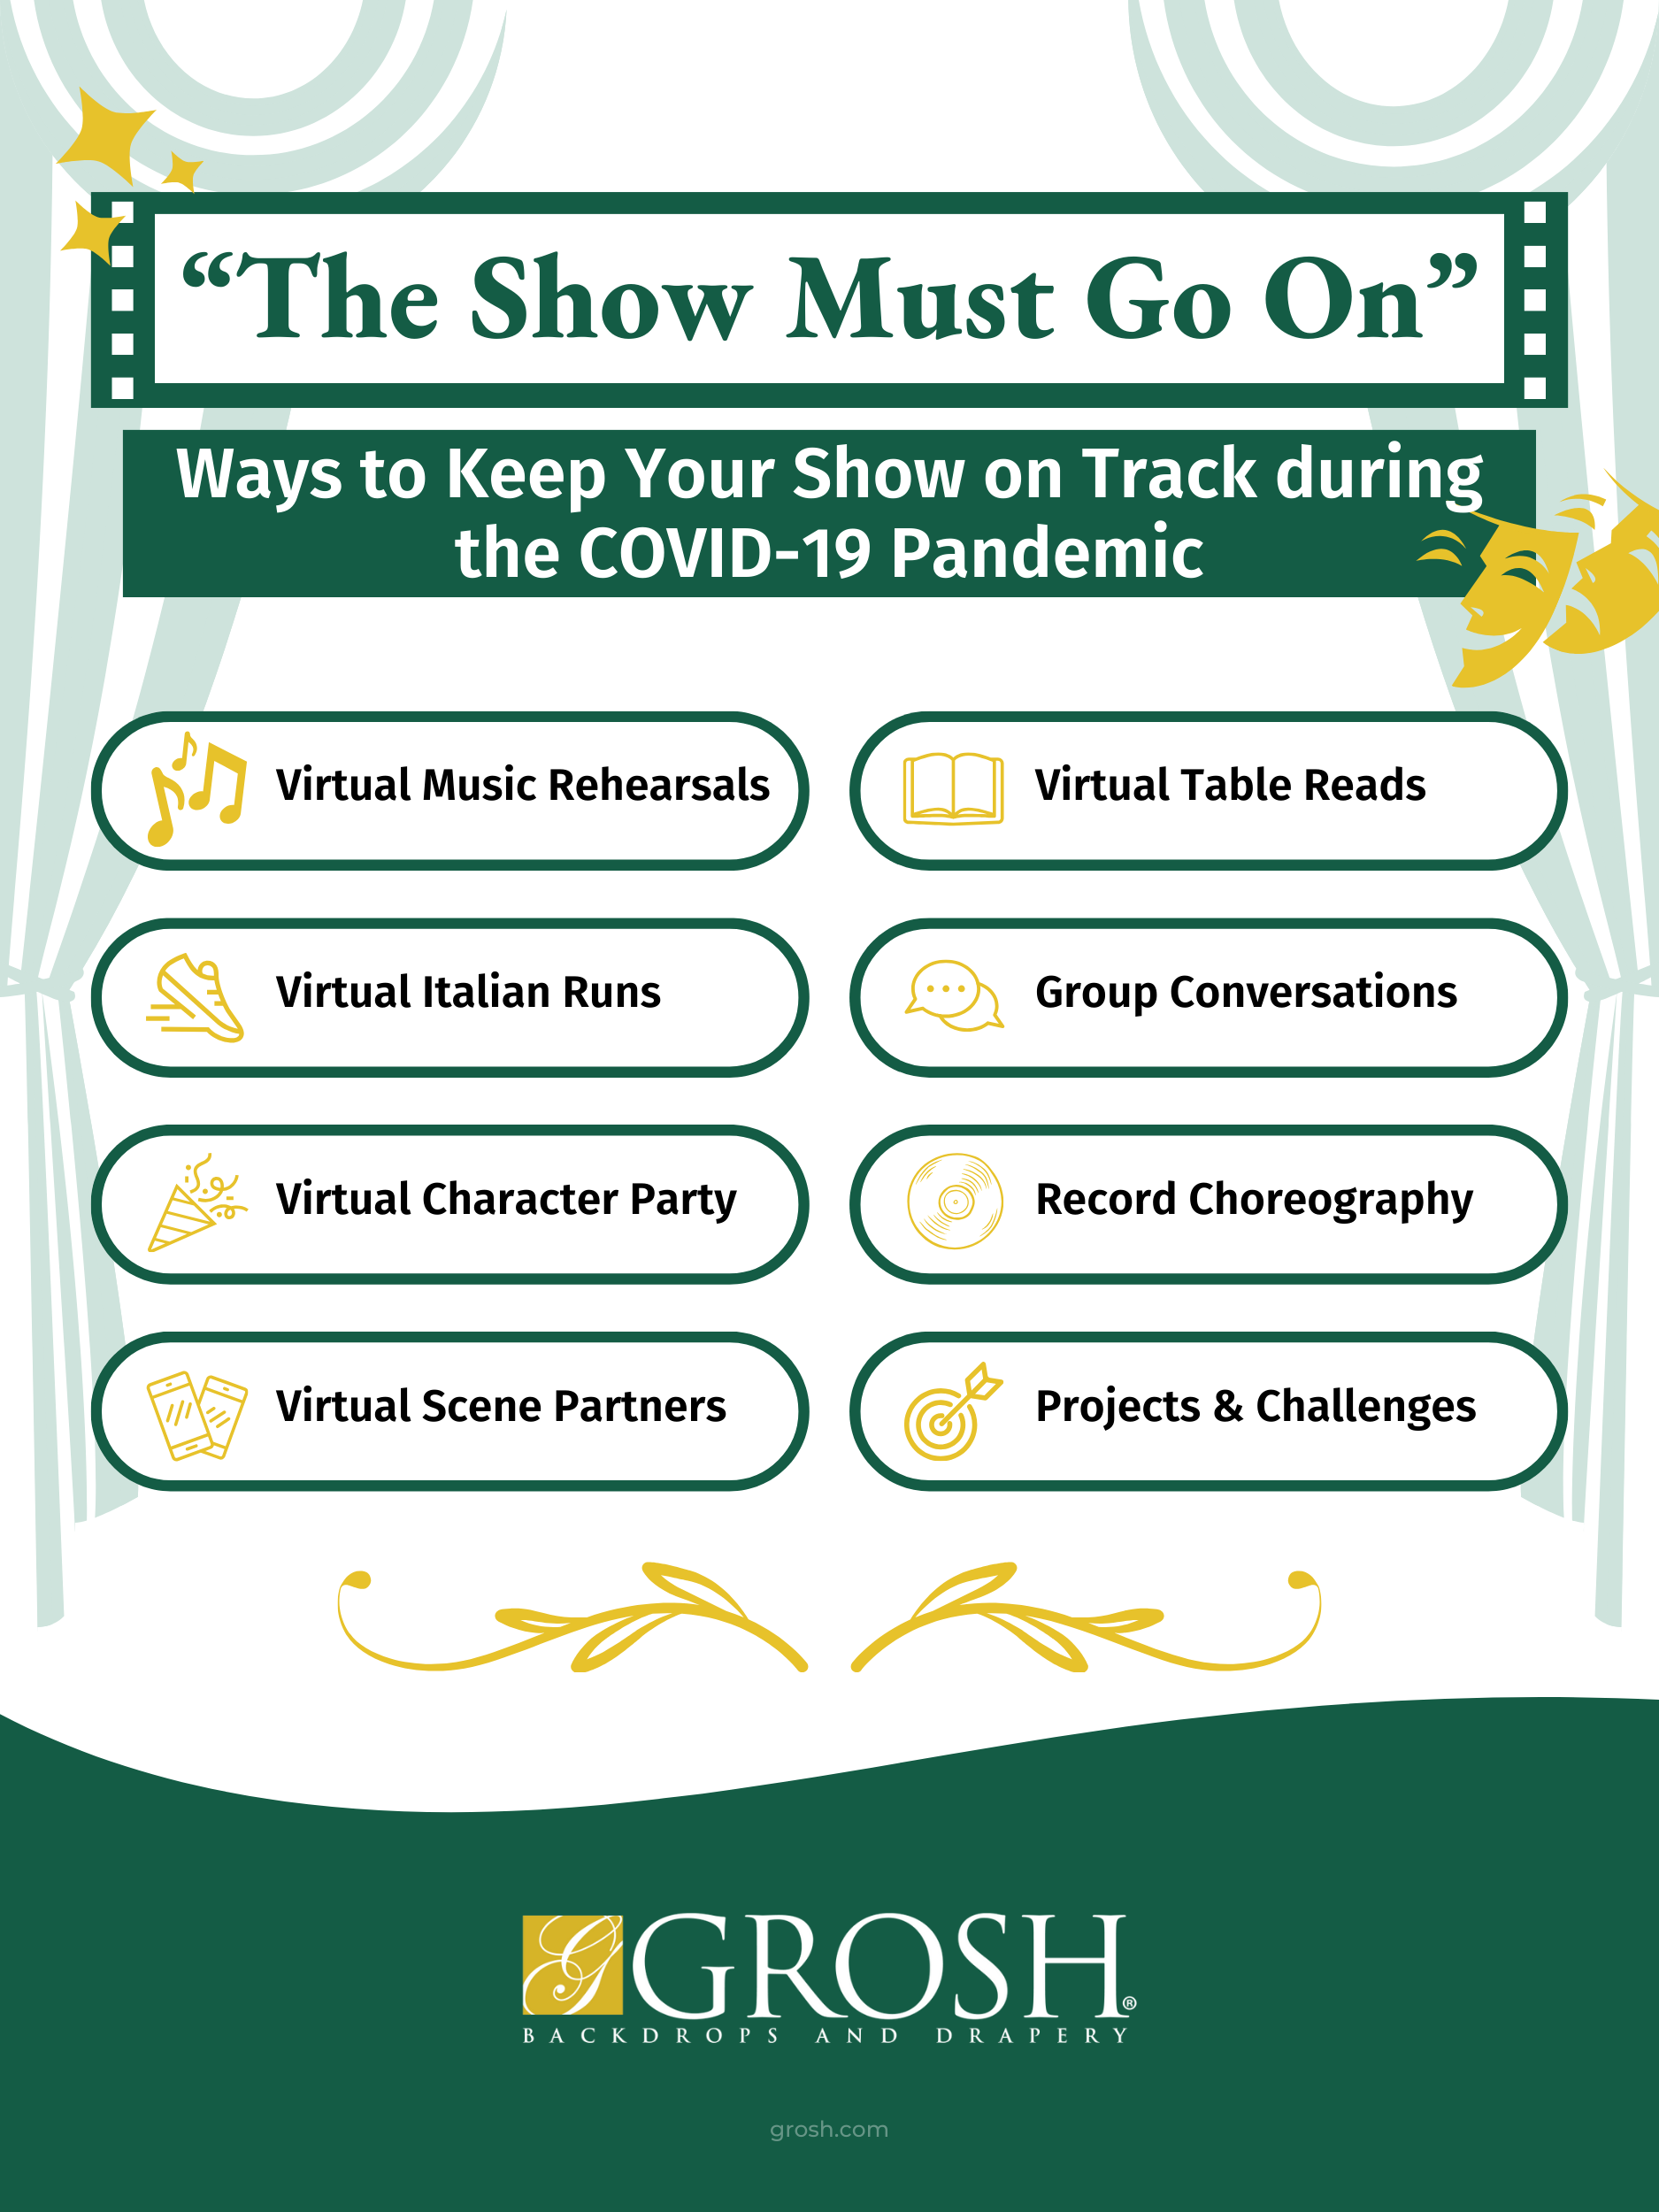 Ways to Keep Your Show on Track During the COVID 19 Pandemic